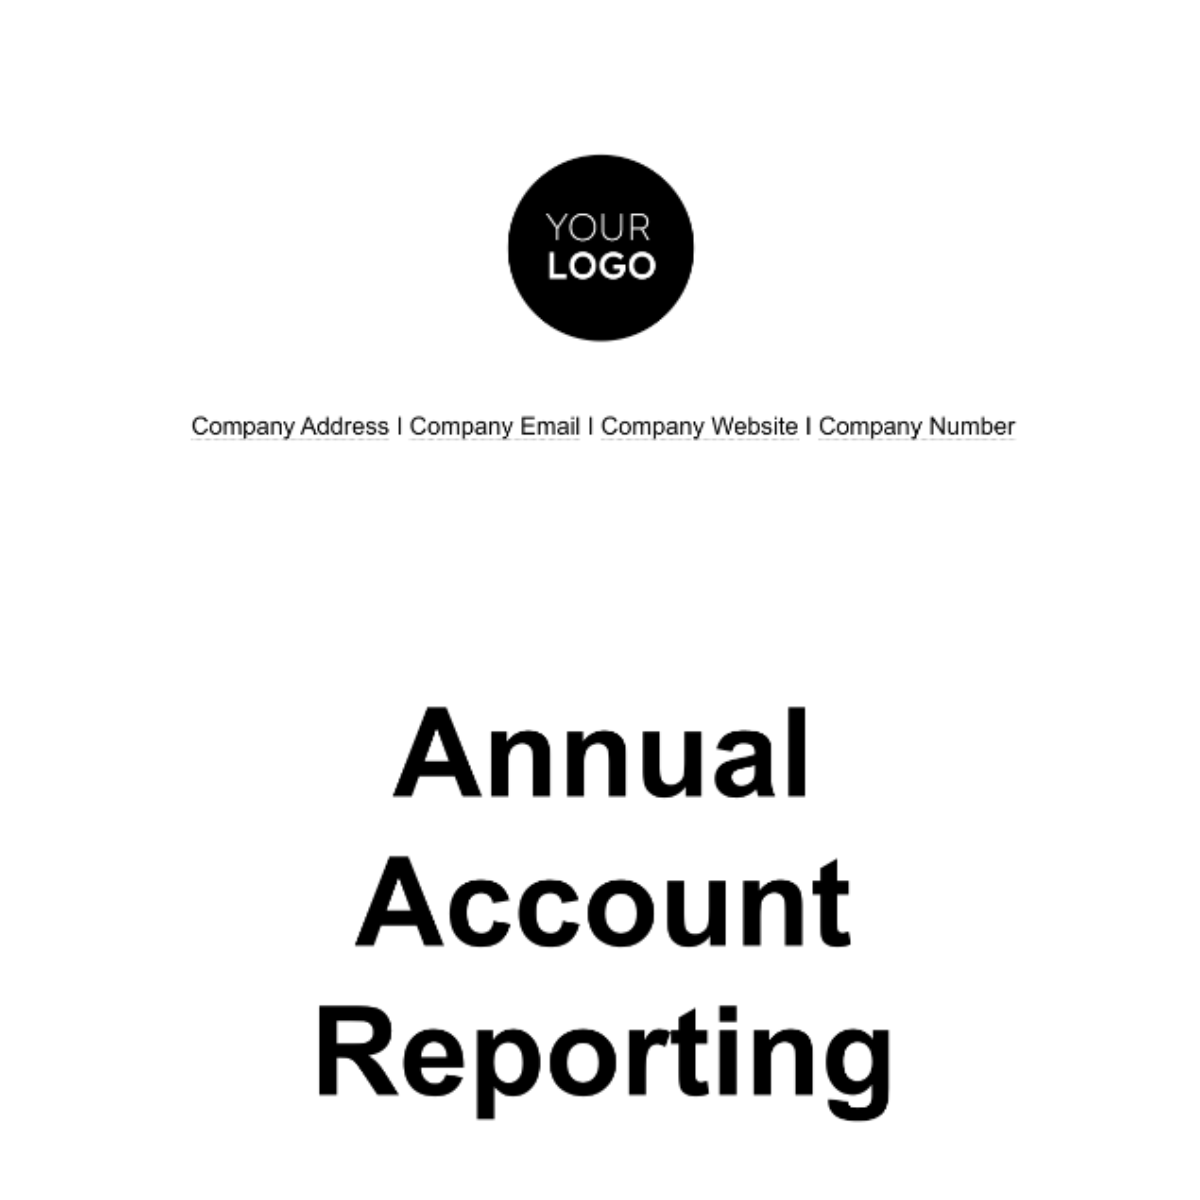 Annual Account Reporting Template